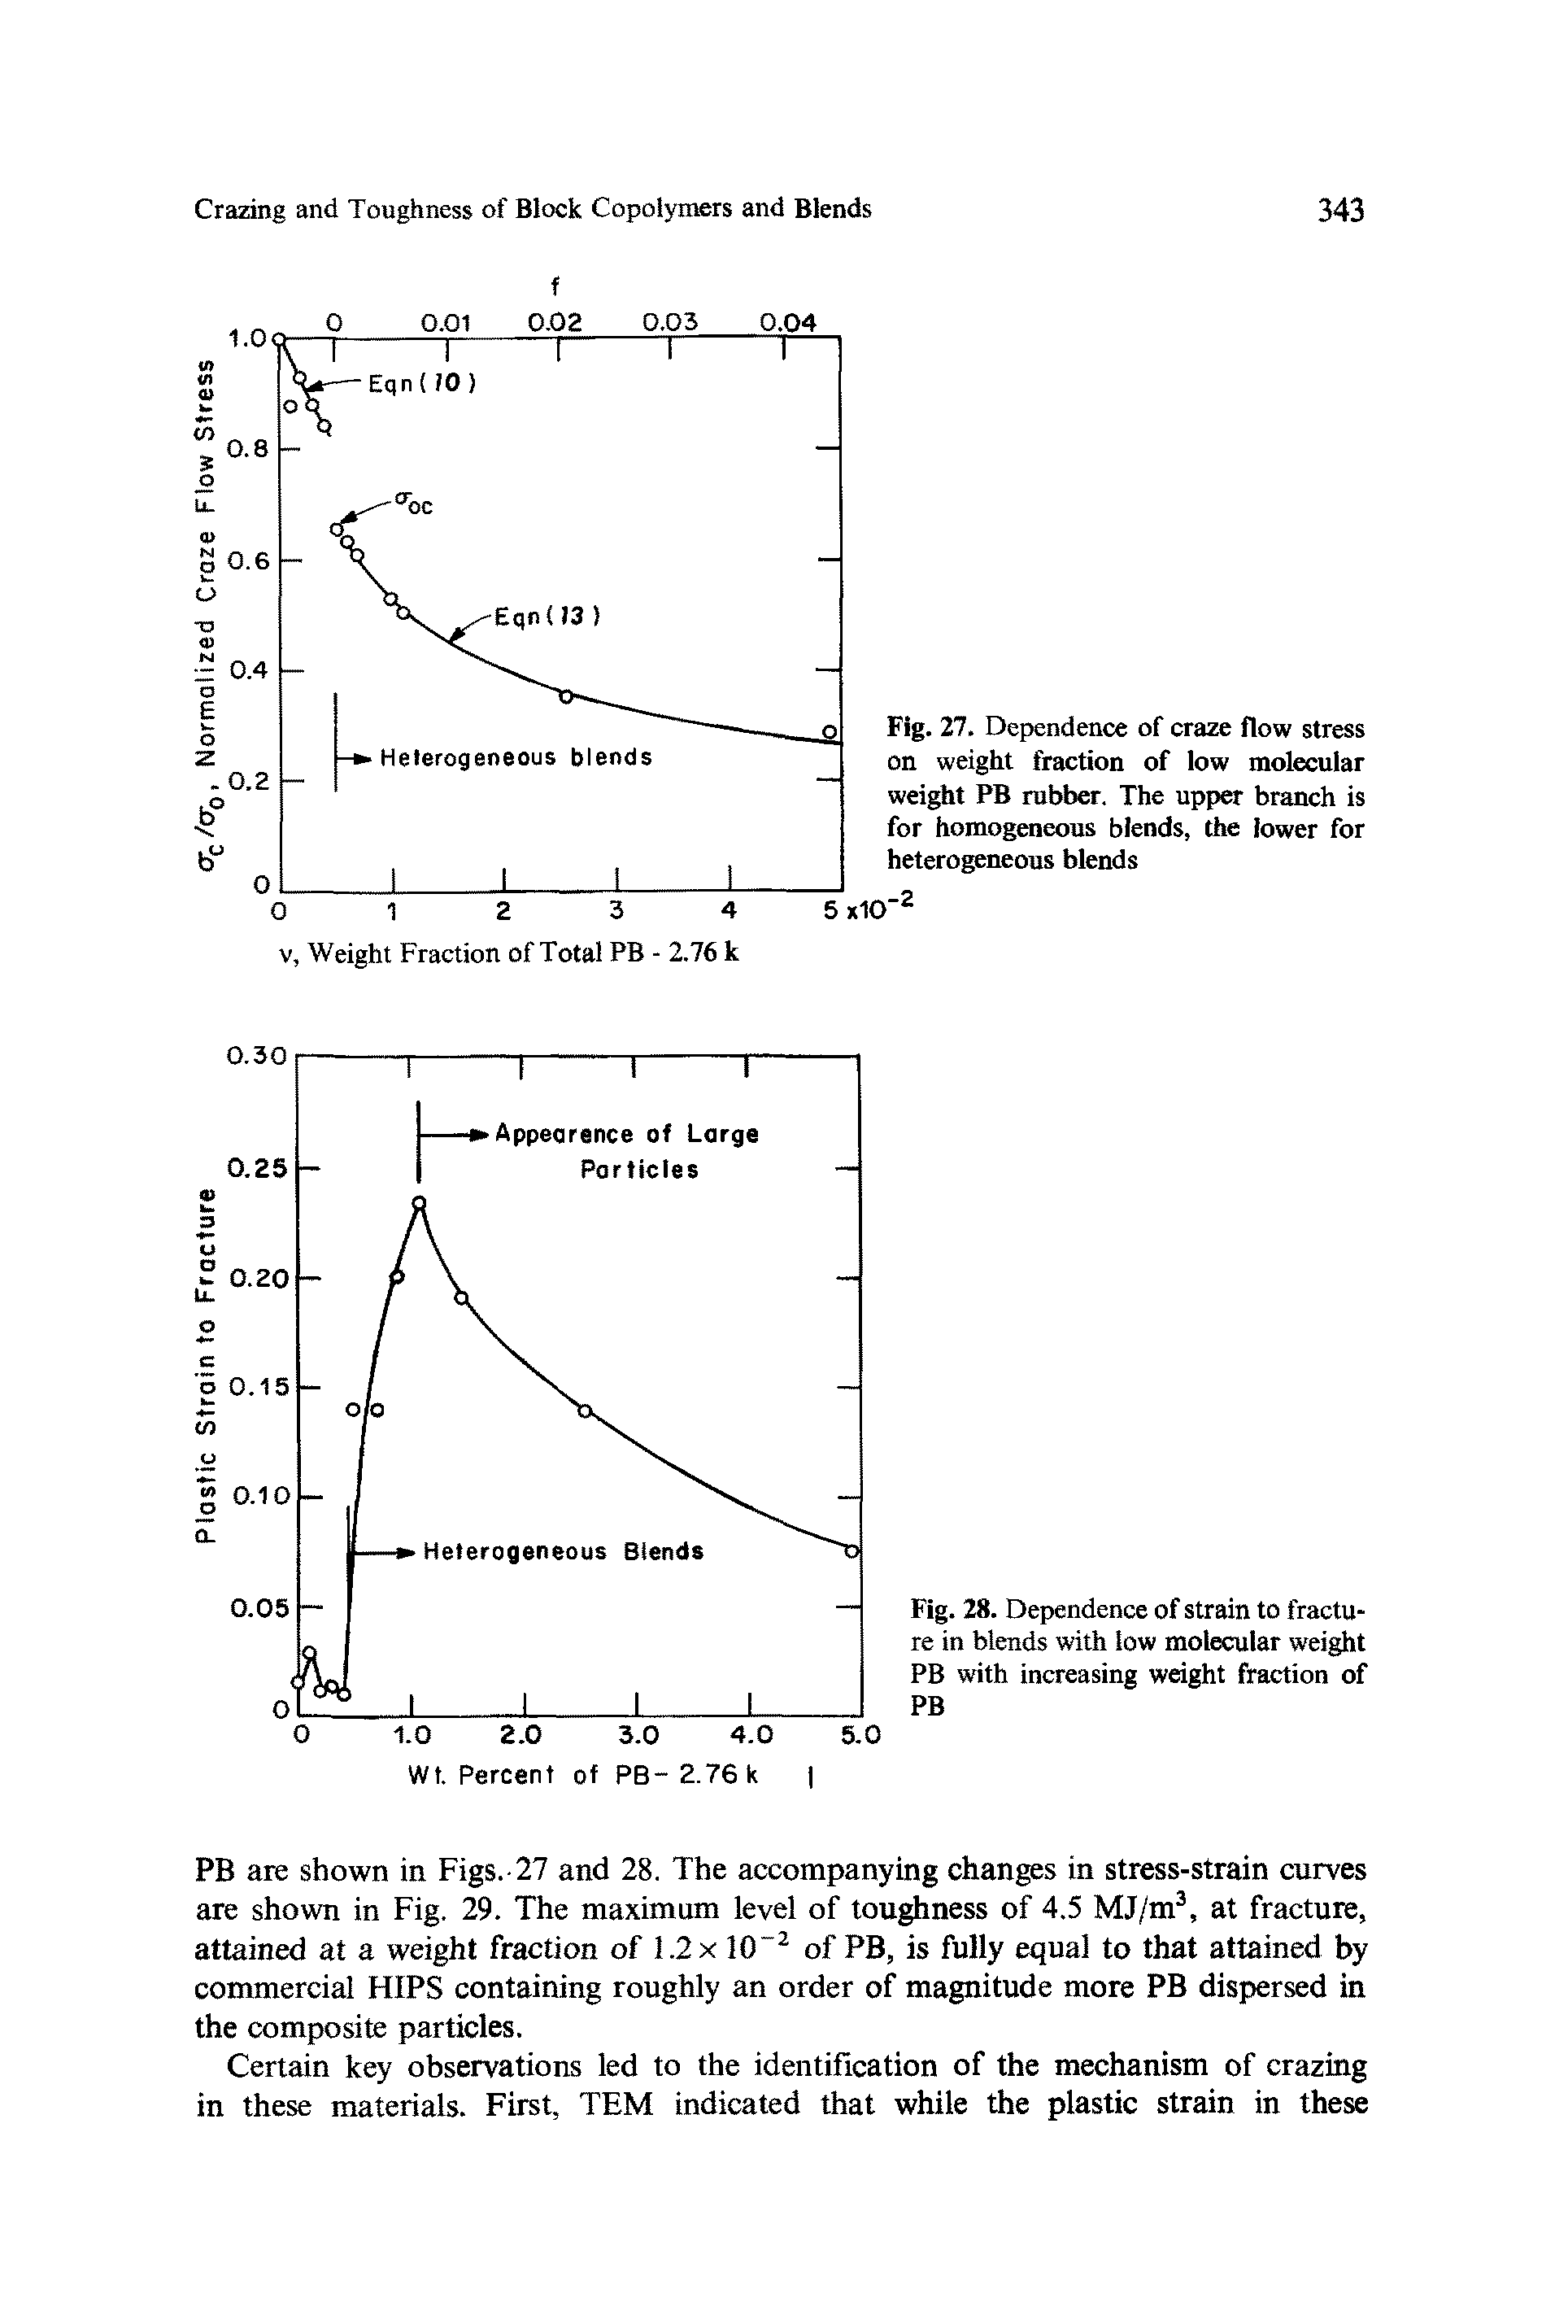 Fig. 27. Dependence of craze flow stress on weight fraction of low molecular weight PB rubber. The upper branch is for homogeneous blends, the lower for heterogeneous blends ->-2...